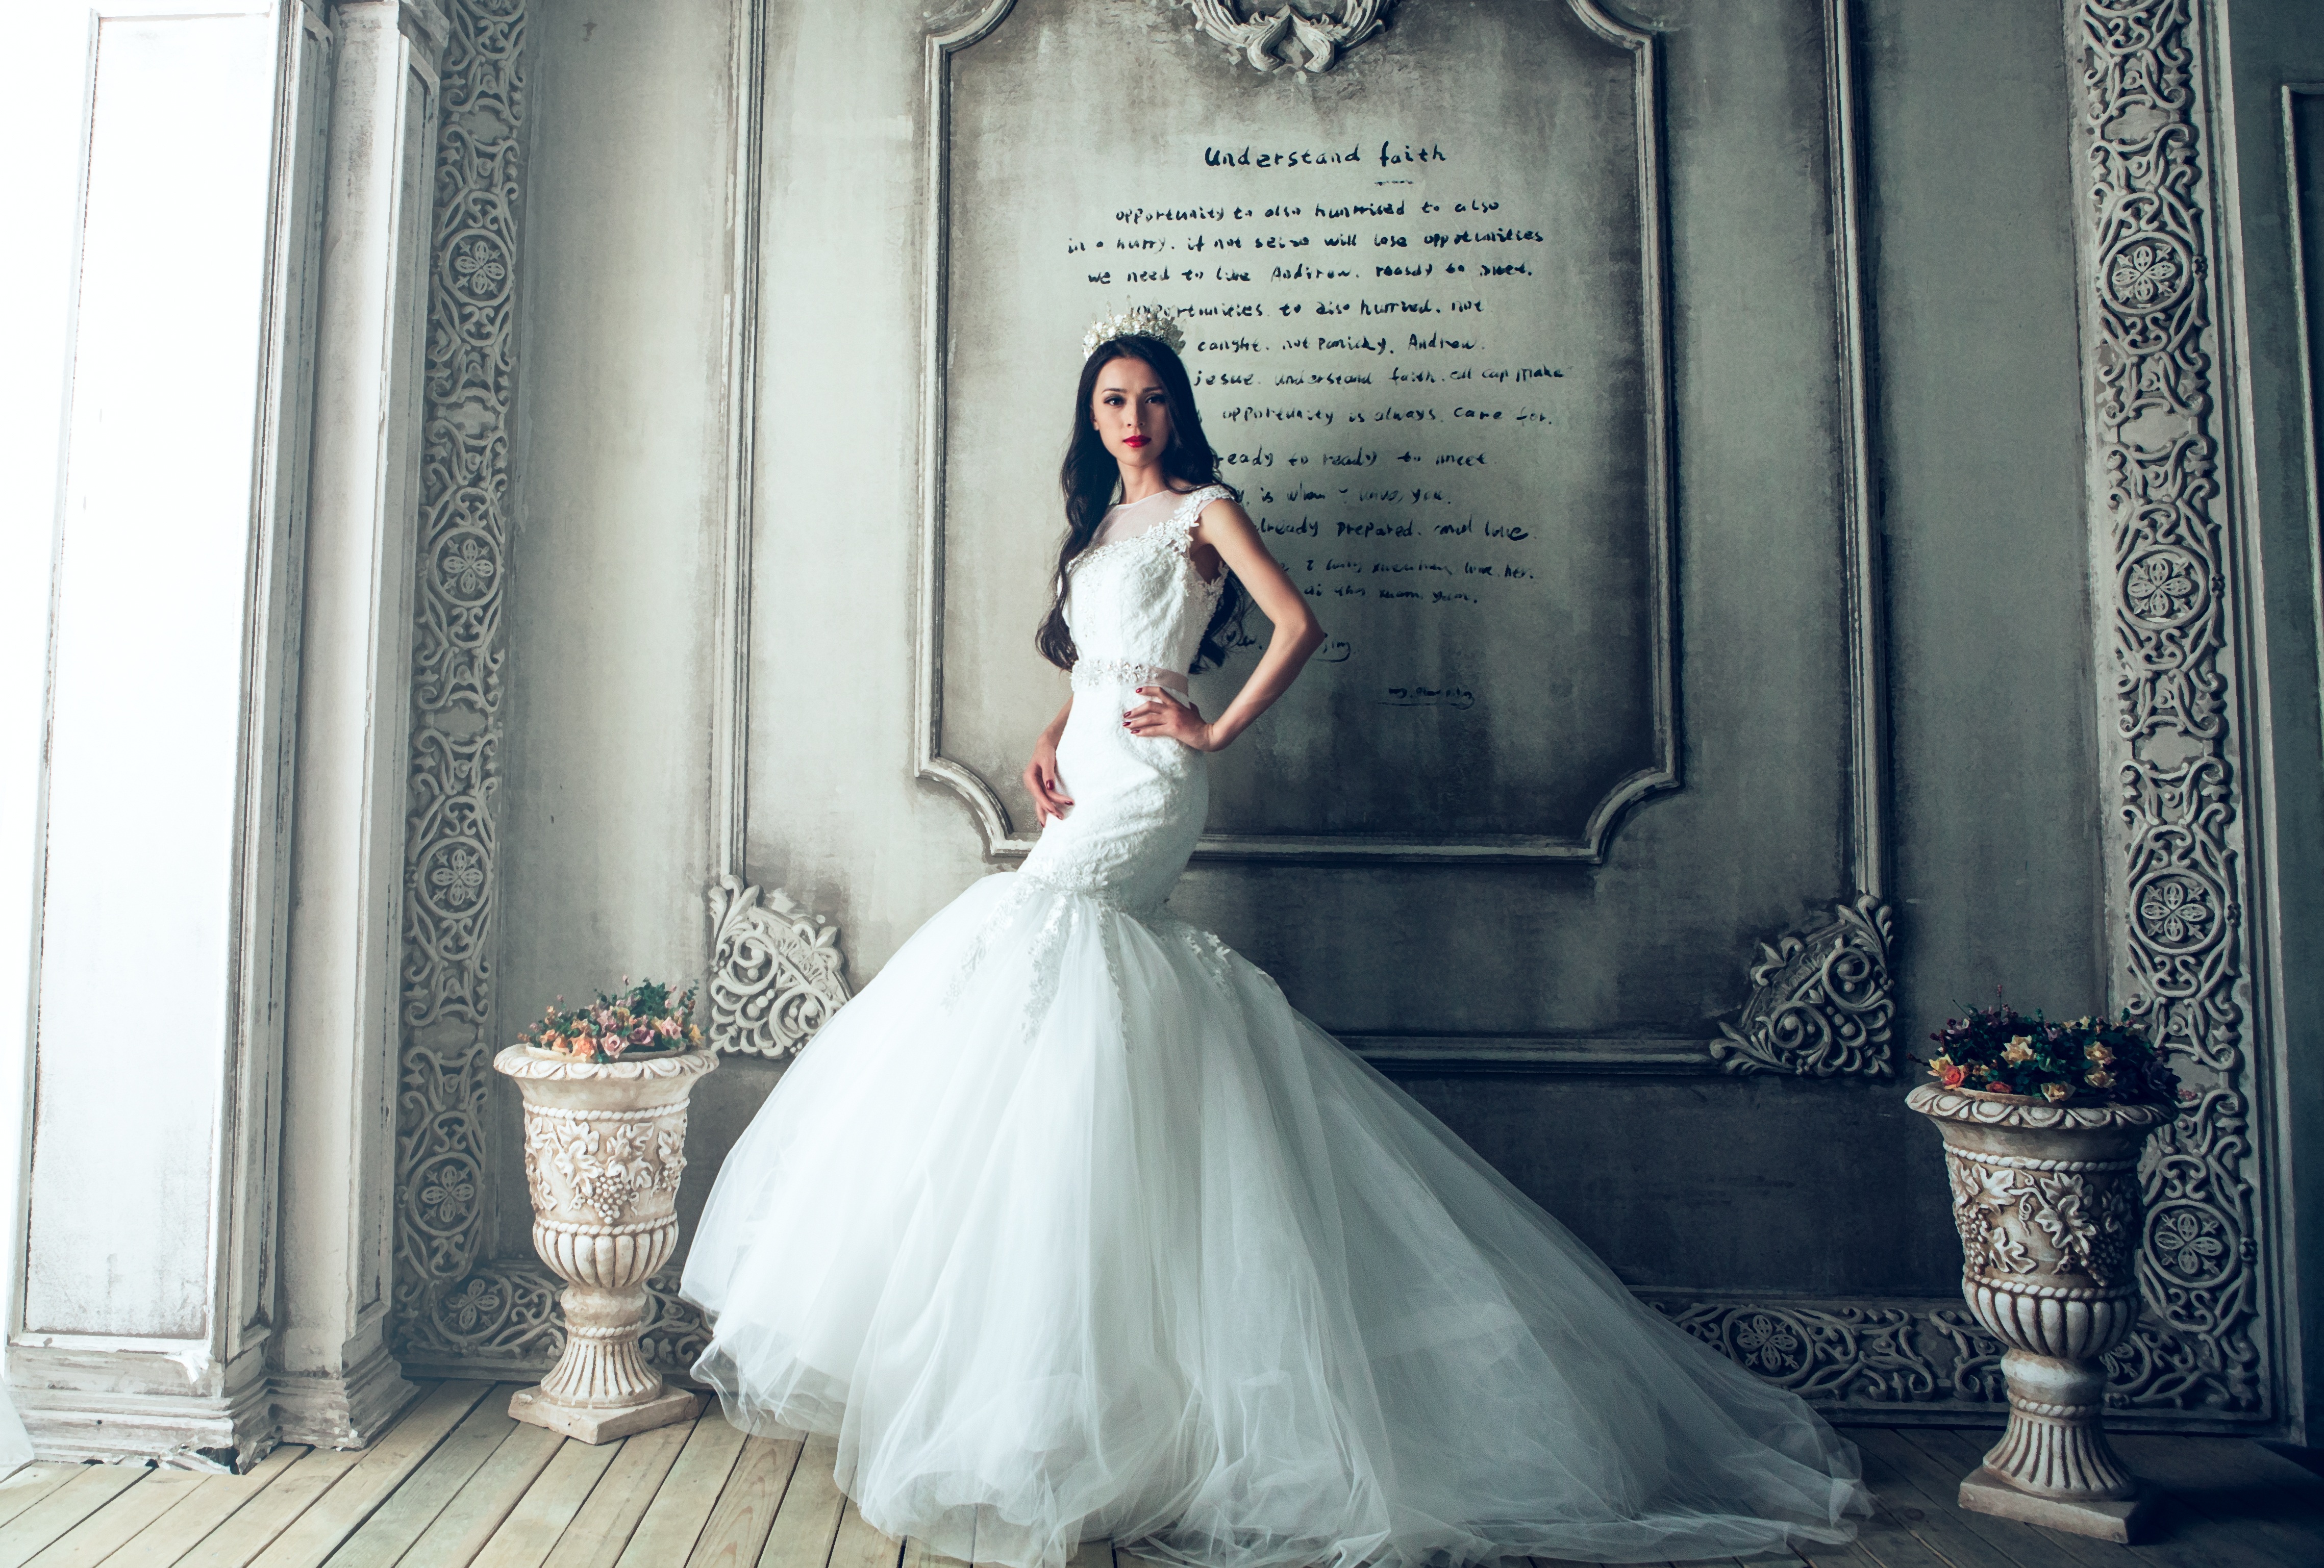 A girl in a wedding dress poses in a gloomy room